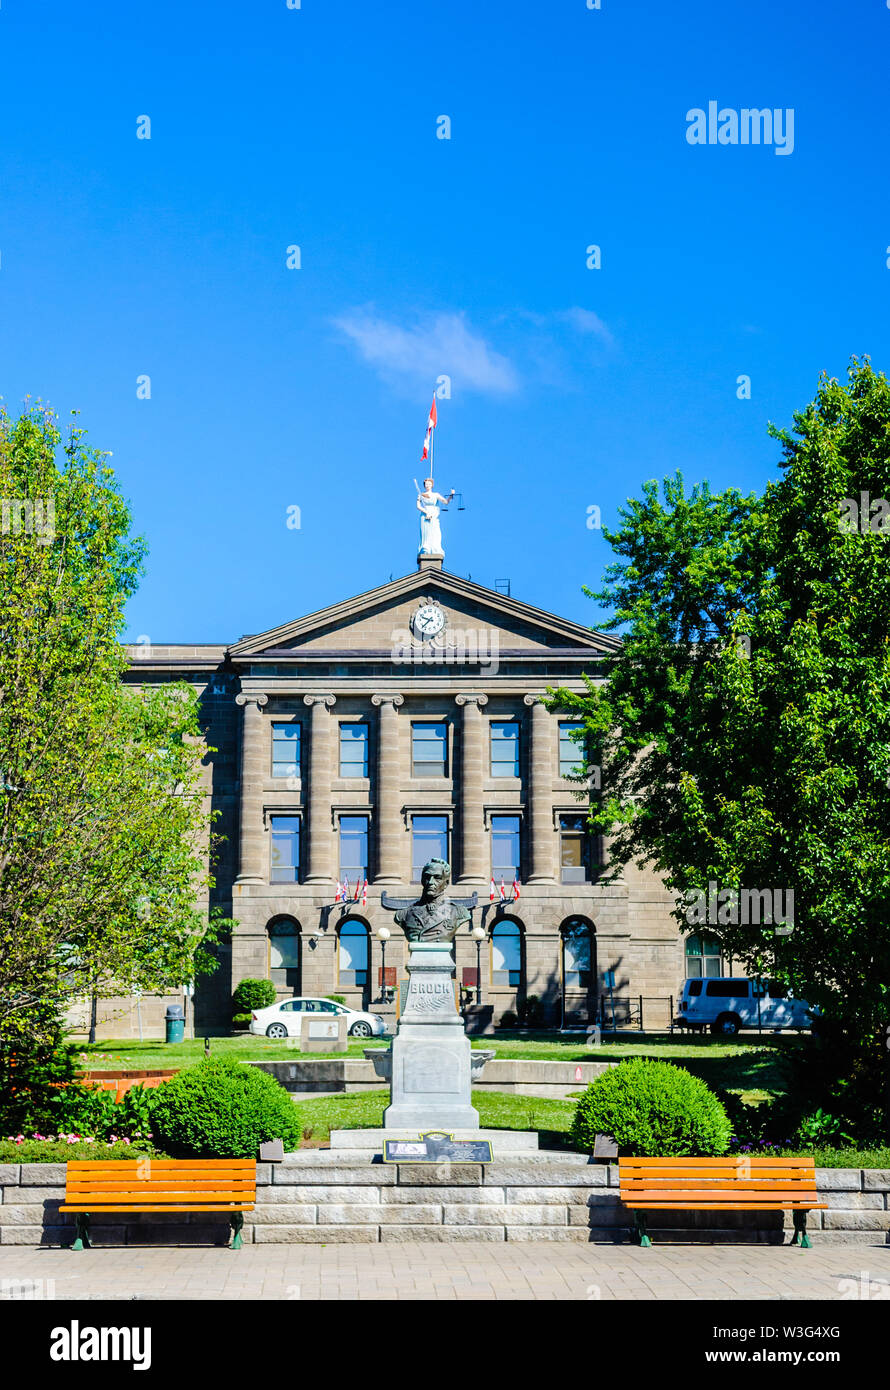 BROCKVILLE, ONTARIO, CANADA - JUNE 19, 2018: The county court house overlooks a monument of Sir Isaac Brock, and is a historic site. Stock Photo